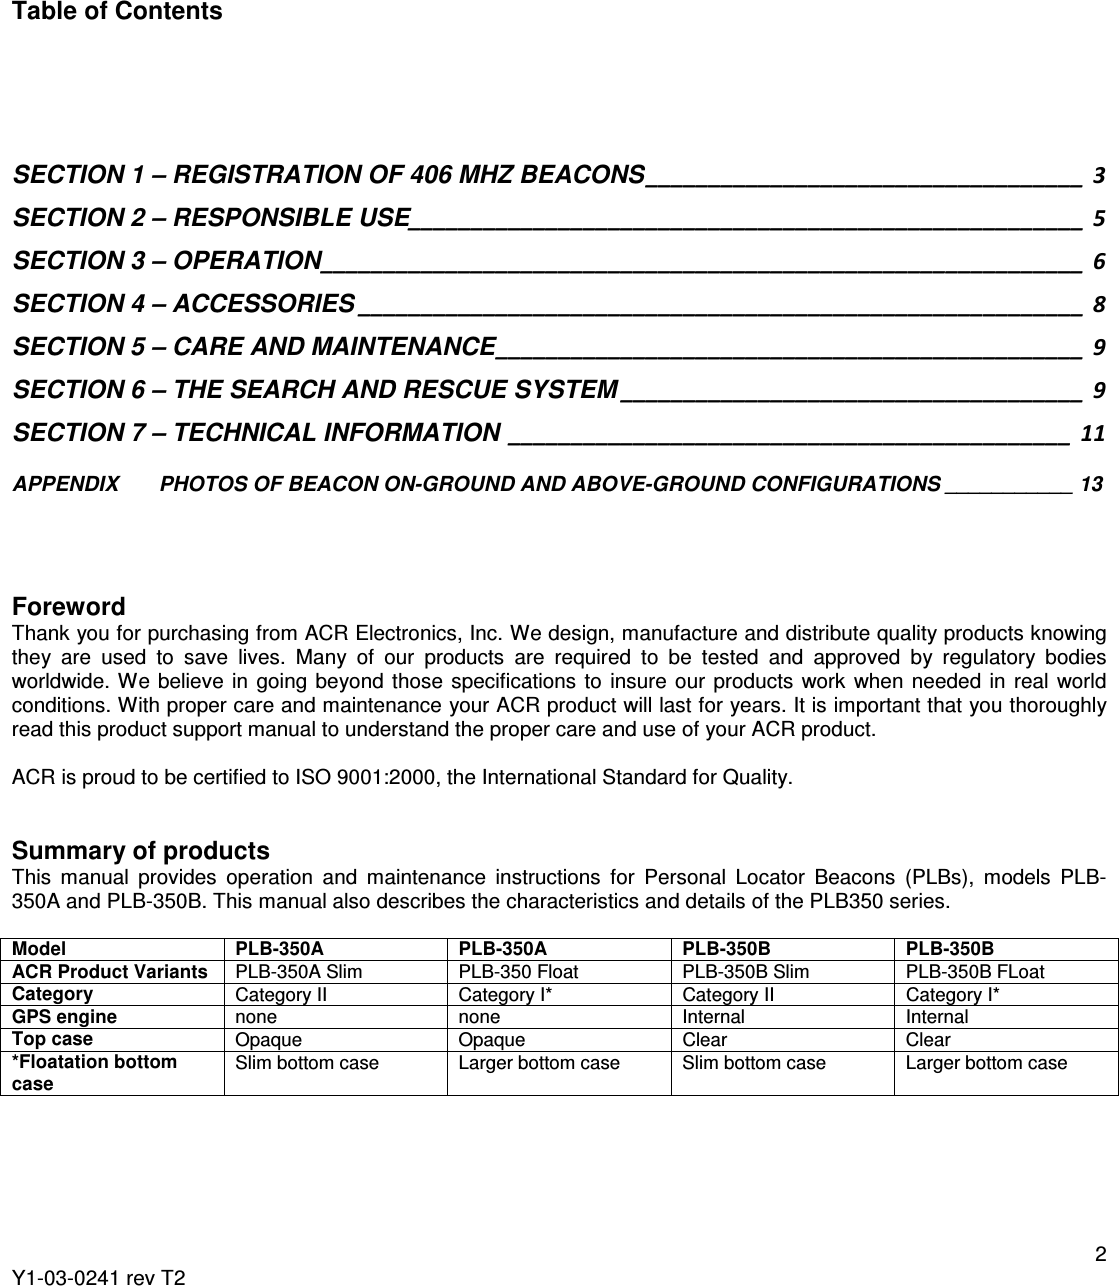  2 Y1-03-0241 rev T2        Table of Contents     SECTION 1 – REGISTRATION OF 406 MHZ BEACONS ___________________________________  3 SECTION 2 – RESPONSIBLE USE ______________________________________________________  5 SECTION 3 – OPERATION _____________________________________________________________  6 SECTION 4 – ACCESSORIES __________________________________________________________  8 SECTION 5 – CARE AND MAINTENANCE _______________________________________________  9 SECTION 6 – THE SEARCH AND RESCUE SYSTEM _____________________________________  9 SECTION 7 – TECHNICAL INFORMATION  _____________________________________________  11  APPENDIX       PHOTOS OF BEACON ON-GROUND AND ABOVE-GROUND CONFIGURATIONS ___________ 13     Foreword Thank you for purchasing from ACR Electronics, Inc. We design, manufacture and distribute quality products knowing they  are  used  to  save  lives.  Many  of  our  products  are  required  to  be  tested  and  approved  by  regulatory  bodies worldwide. We believe  in  going  beyond  those  specifications  to  insure  our  products  work  when  needed  in  real  world conditions. With proper care and maintenance your ACR product will last for years. It is important that you thoroughly read this product support manual to understand the proper care and use of your ACR product.  ACR is proud to be certified to ISO 9001:2000, the International Standard for Quality.   Summary of products This  manual  provides  operation  and  maintenance  instructions  for  Personal  Locator  Beacons  (PLBs),  models  PLB-350A and PLB-350B. This manual also describes the characteristics and details of the PLB350 series.   Model PLB-350A  PLB-350A   PLB-350B  PLB-350B   ACR Product Variants PLB-350A Slim  PLB-350 Float  PLB-350B Slim  PLB-350B FLoat Category Category II  Category I*  Category II  Category I* GPS engine none  none  Internal  Internal Top case Opaque  Opaque  Clear  Clear *Floatation bottom case Slim bottom case  Larger bottom case  Slim bottom case  Larger bottom case  